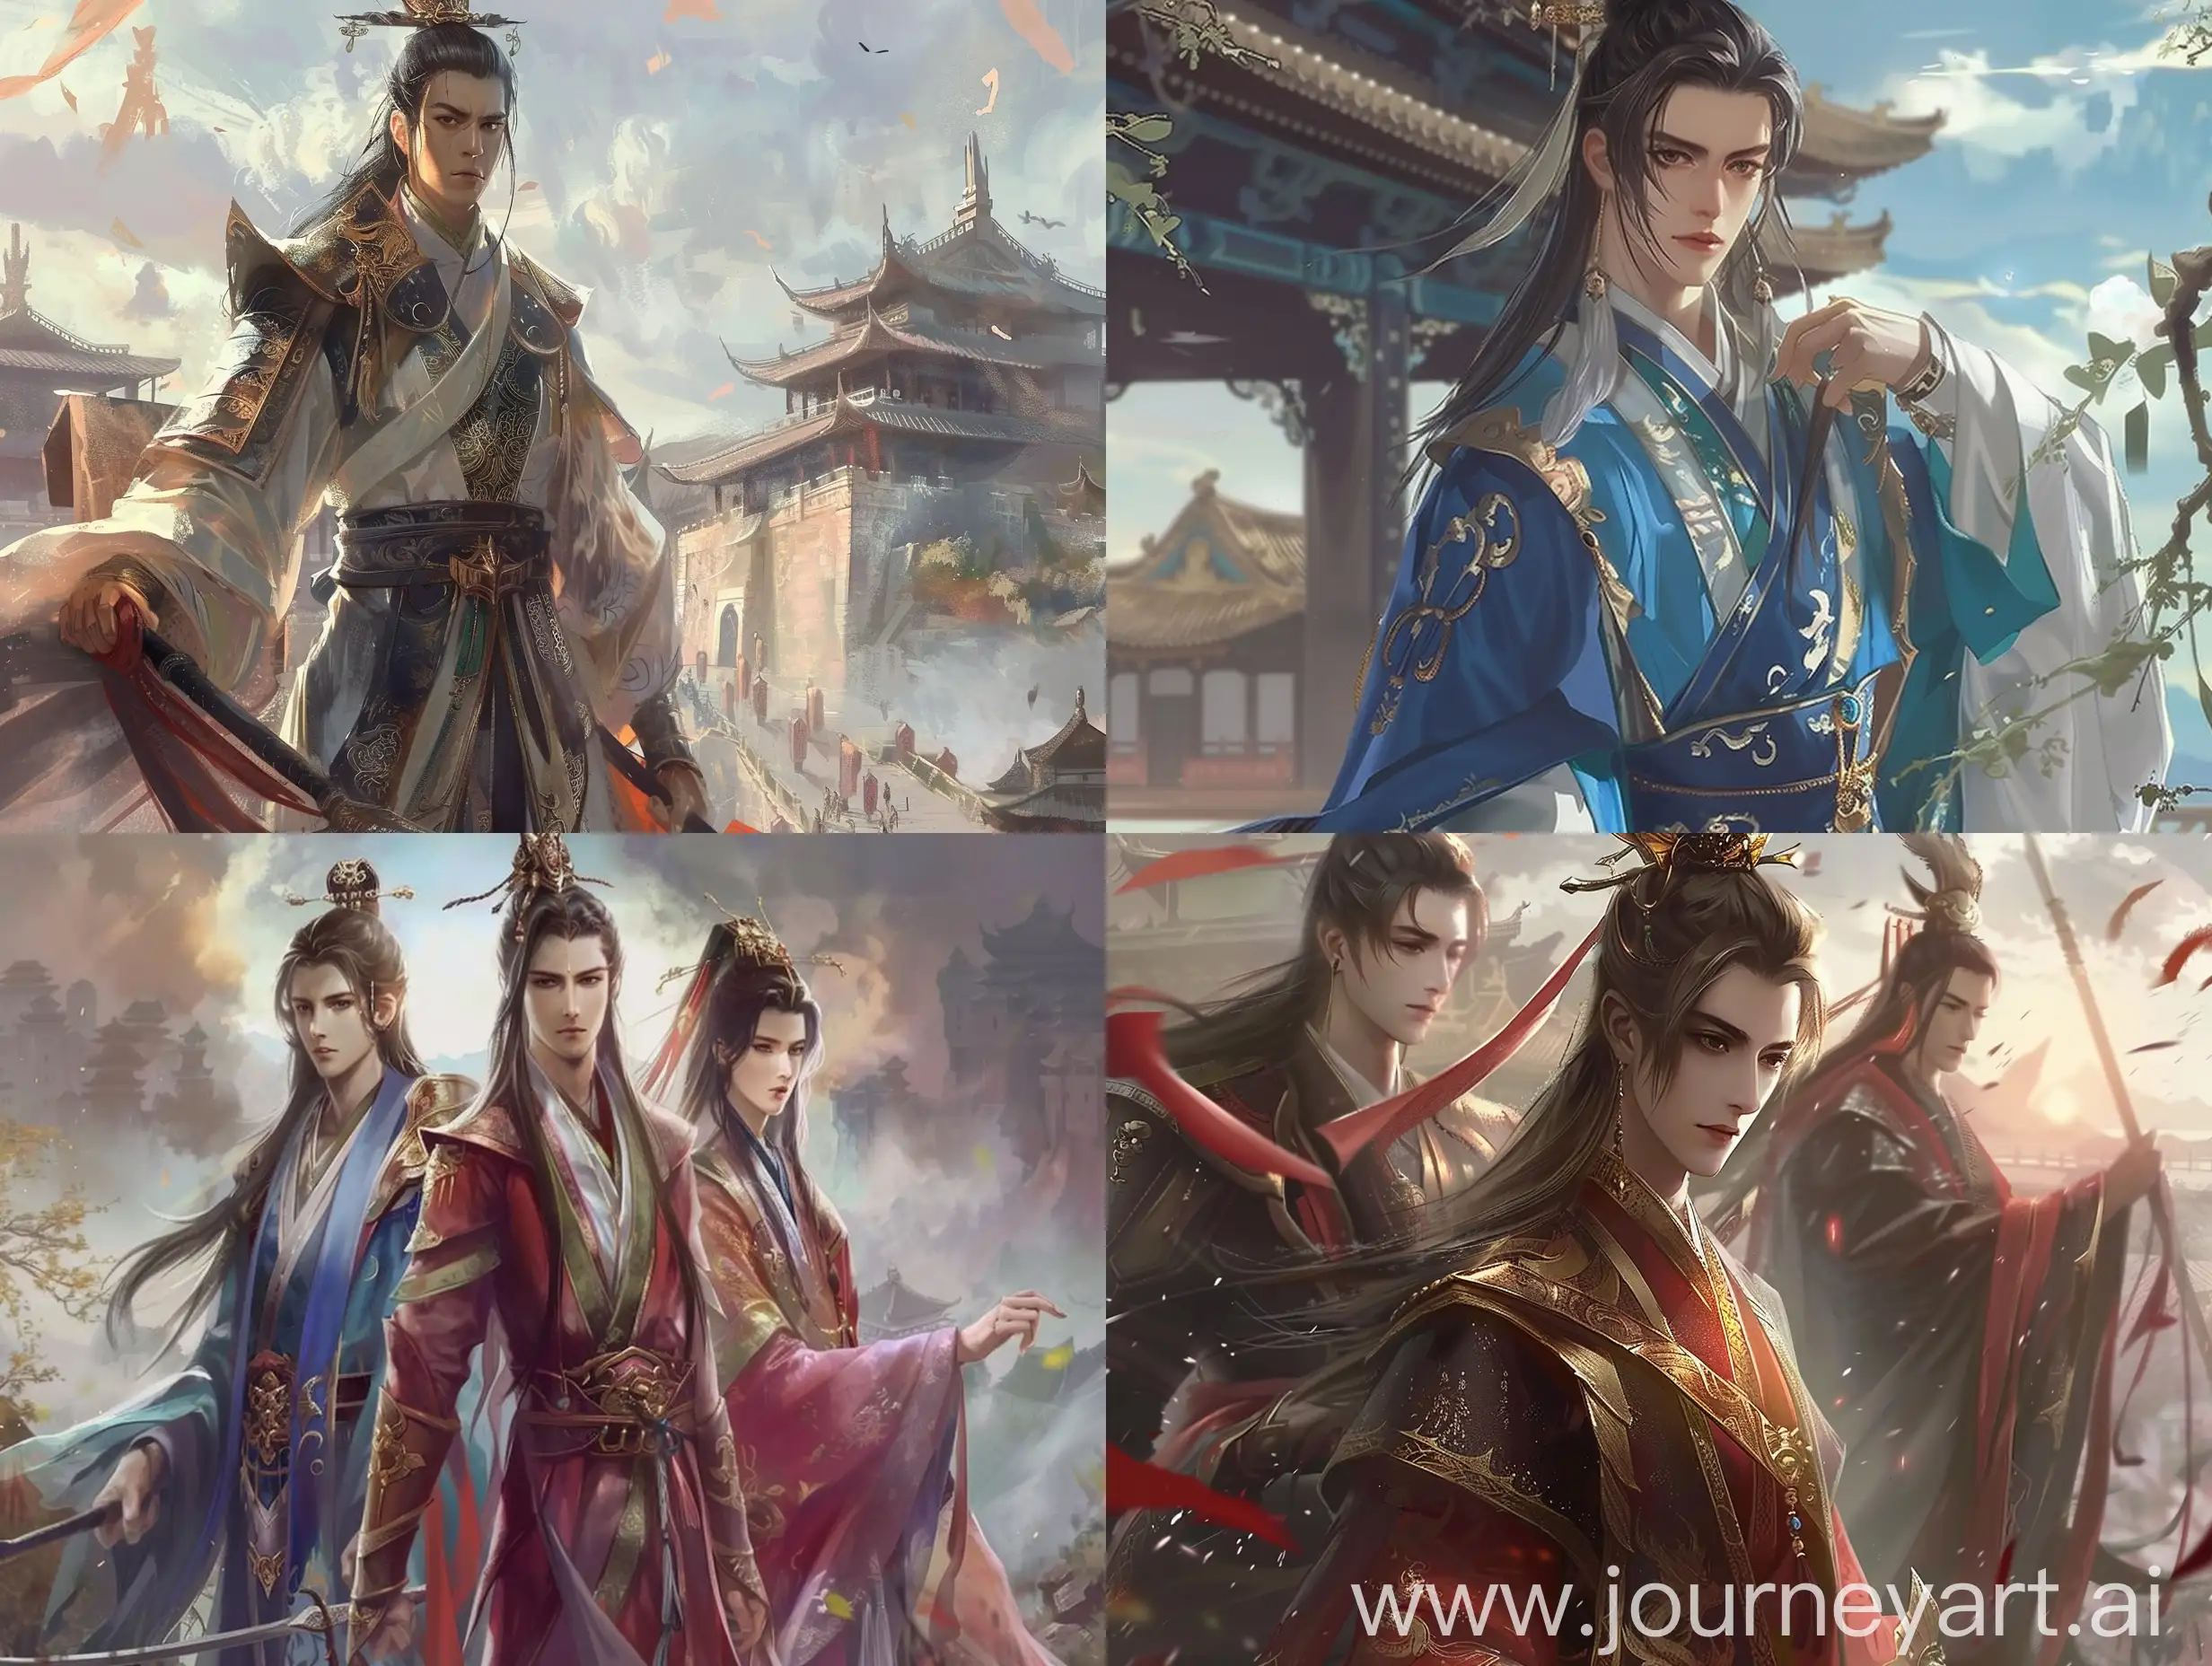 Story of kuning palace but in a xinanxia genre